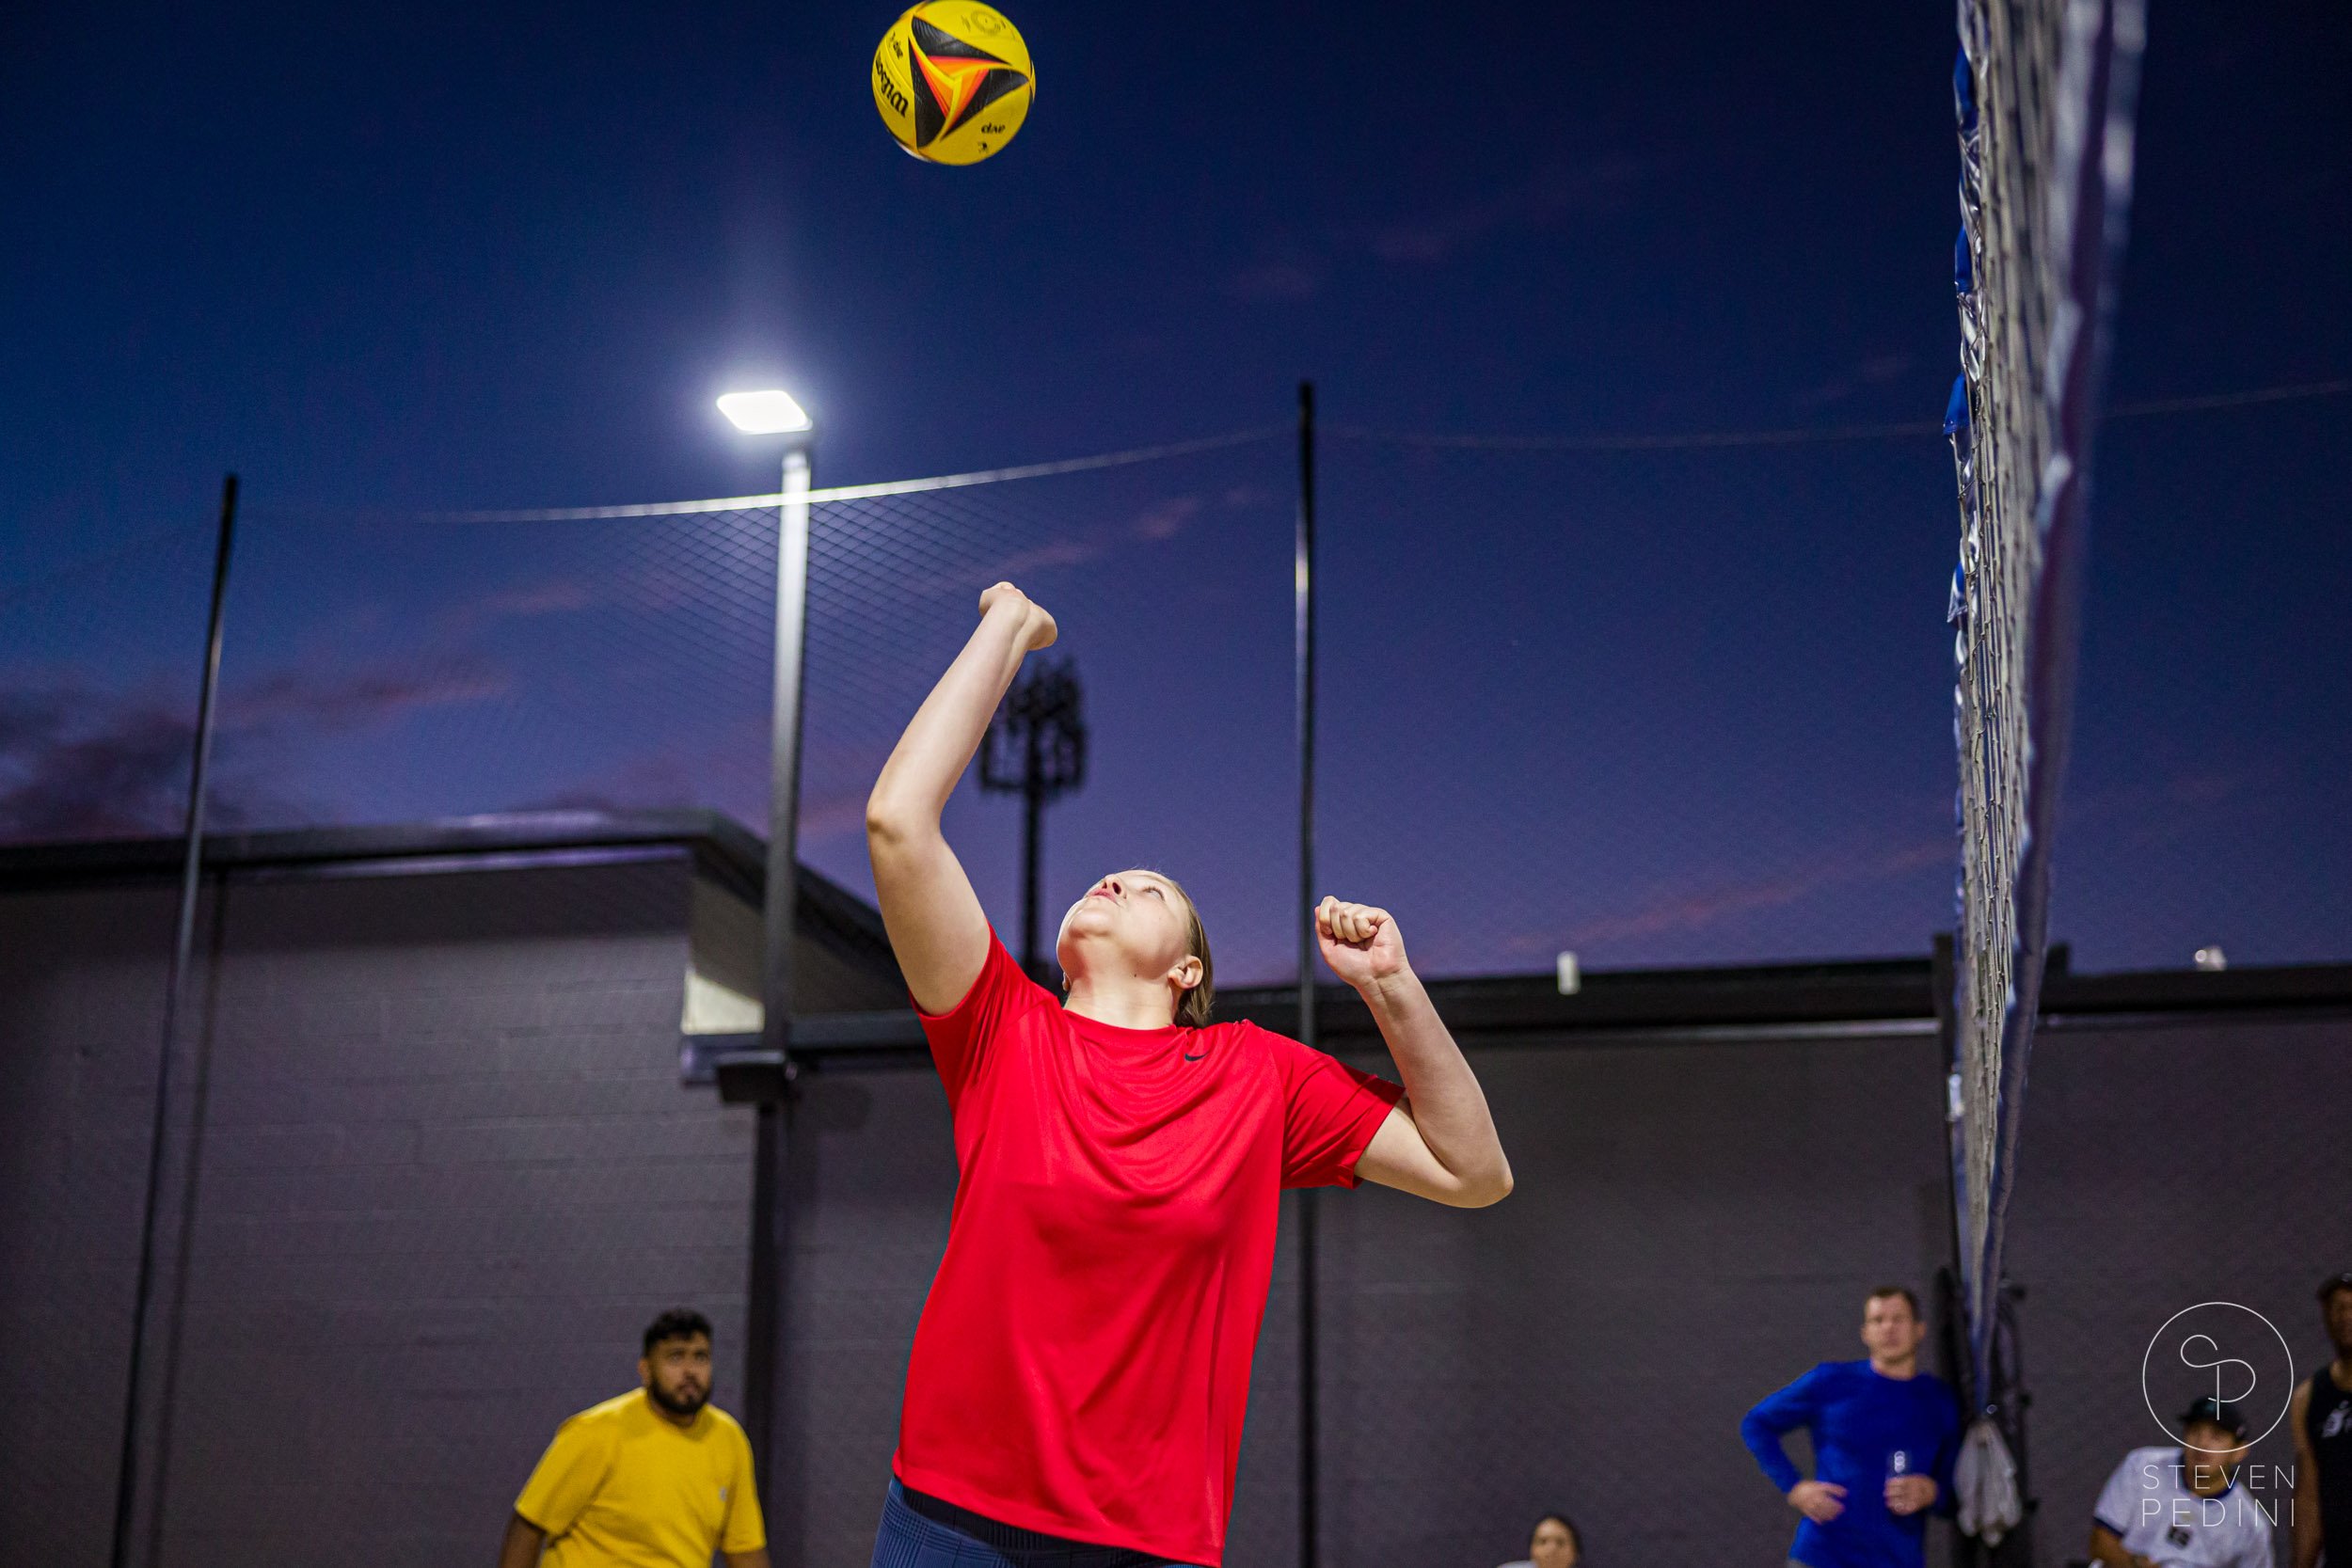 Steven Pedini Photography - Bumpy Pickle - Sand Volleyball - Houston TX - World Cup of Volleyball - 00326.jpg